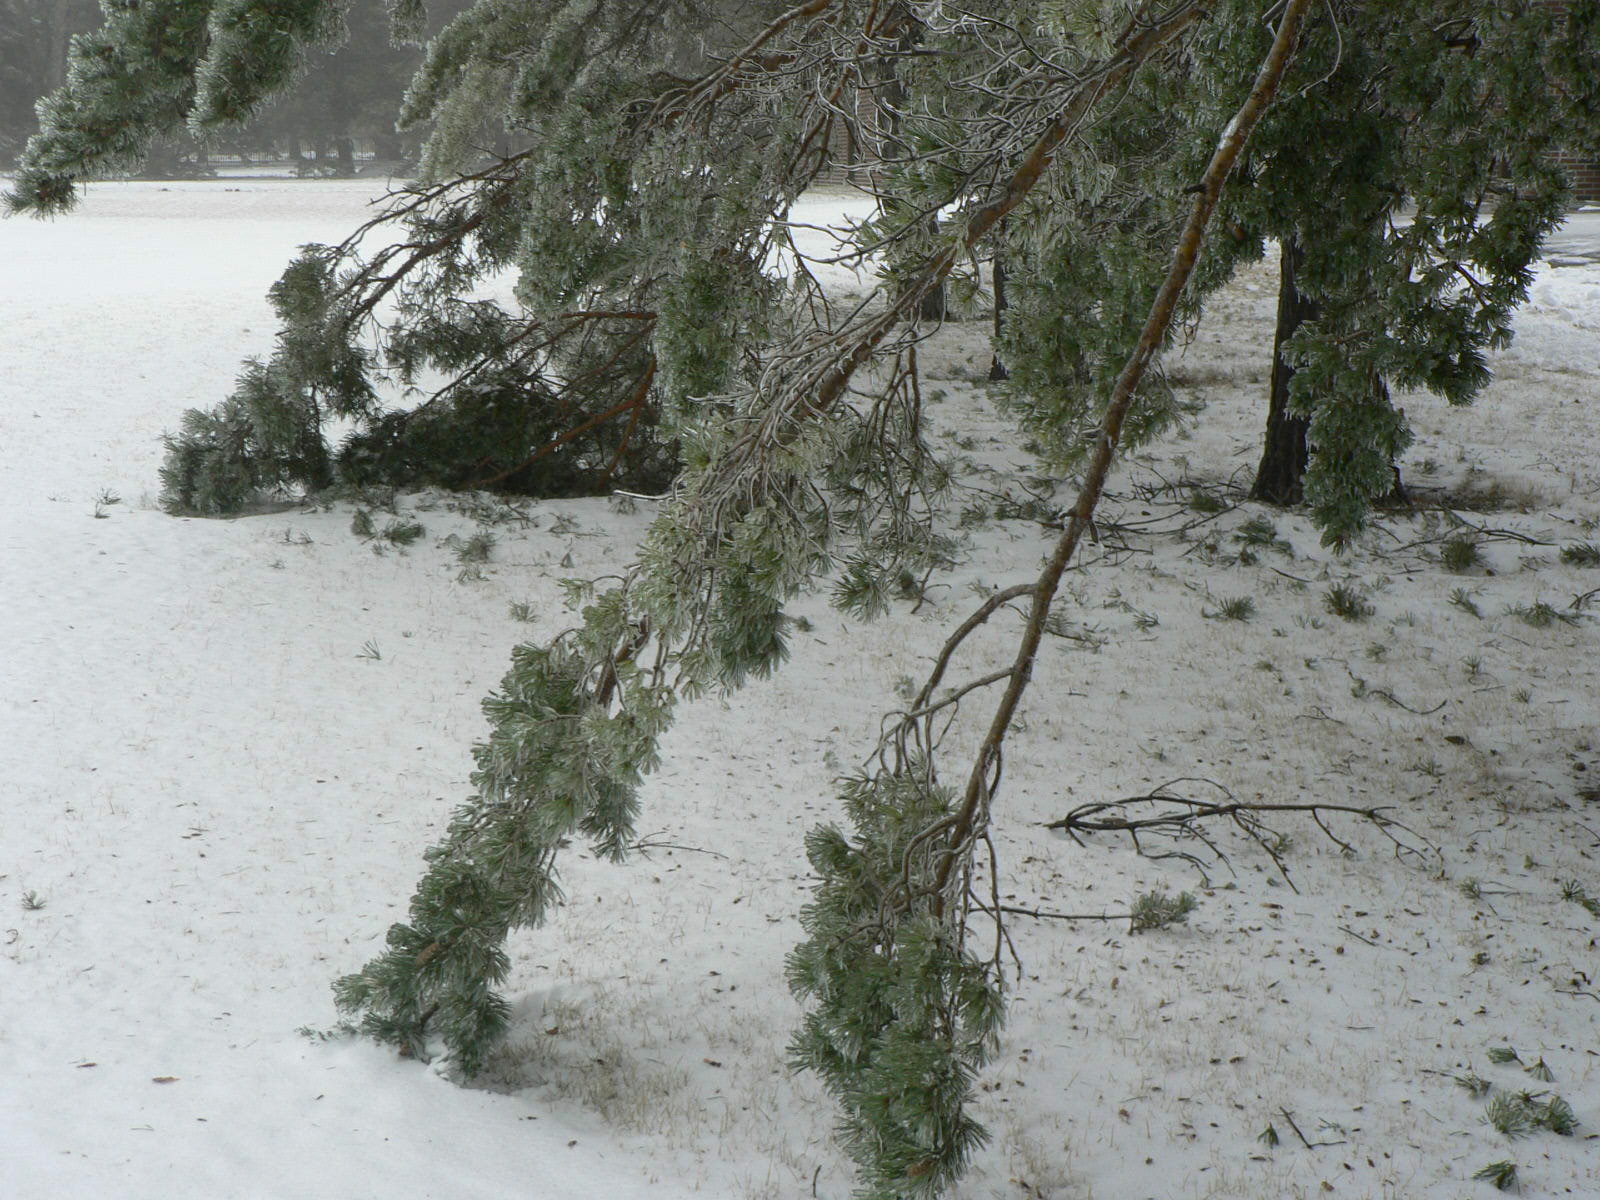 a pine tree branch touching the ground in winter